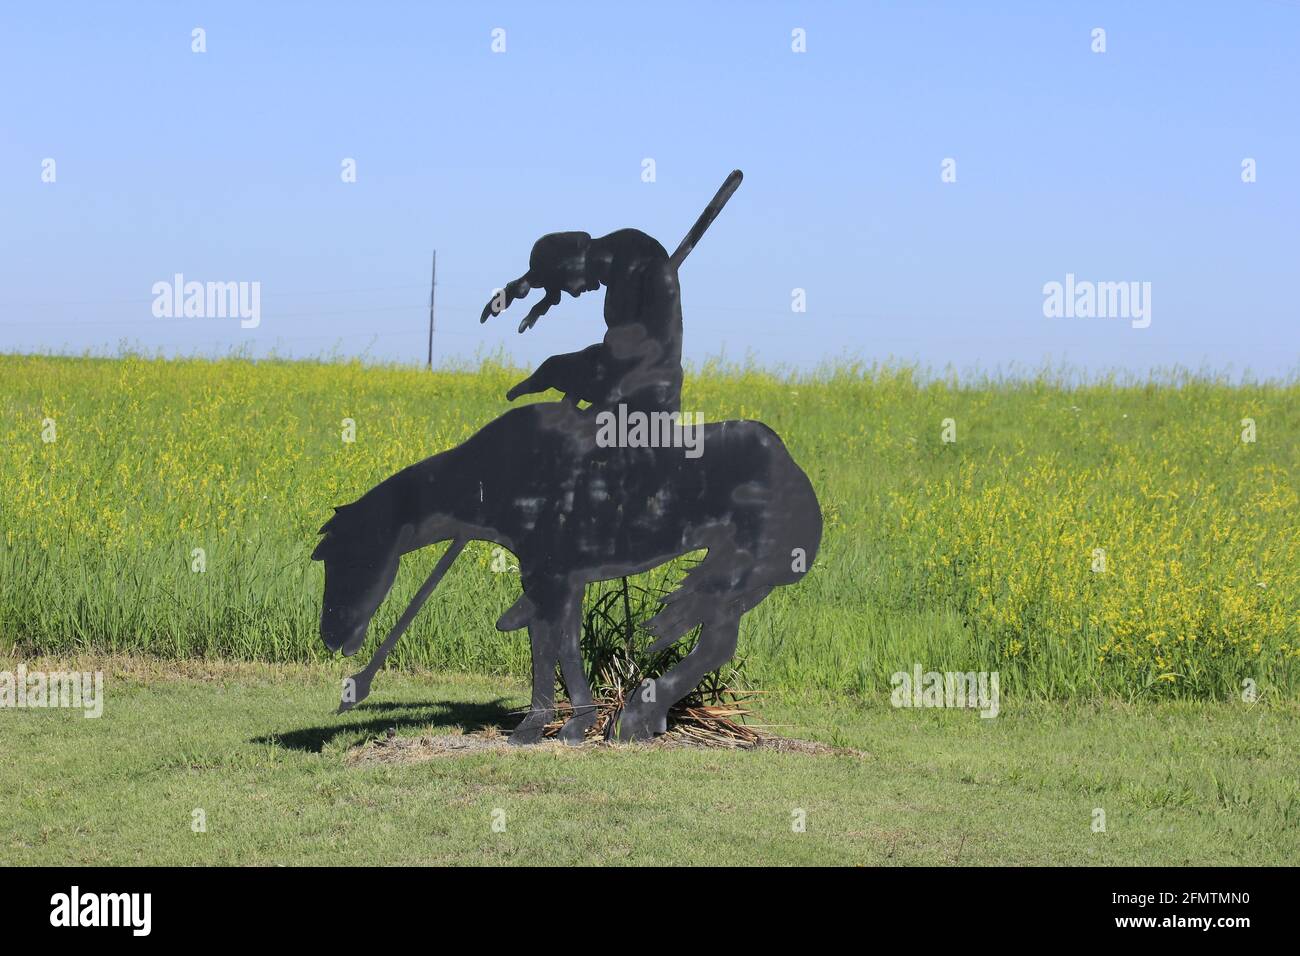 A Metal Indian cut out that's black with a farm field in the background with weeds with yellow flowers in Kansas. Stock Photo